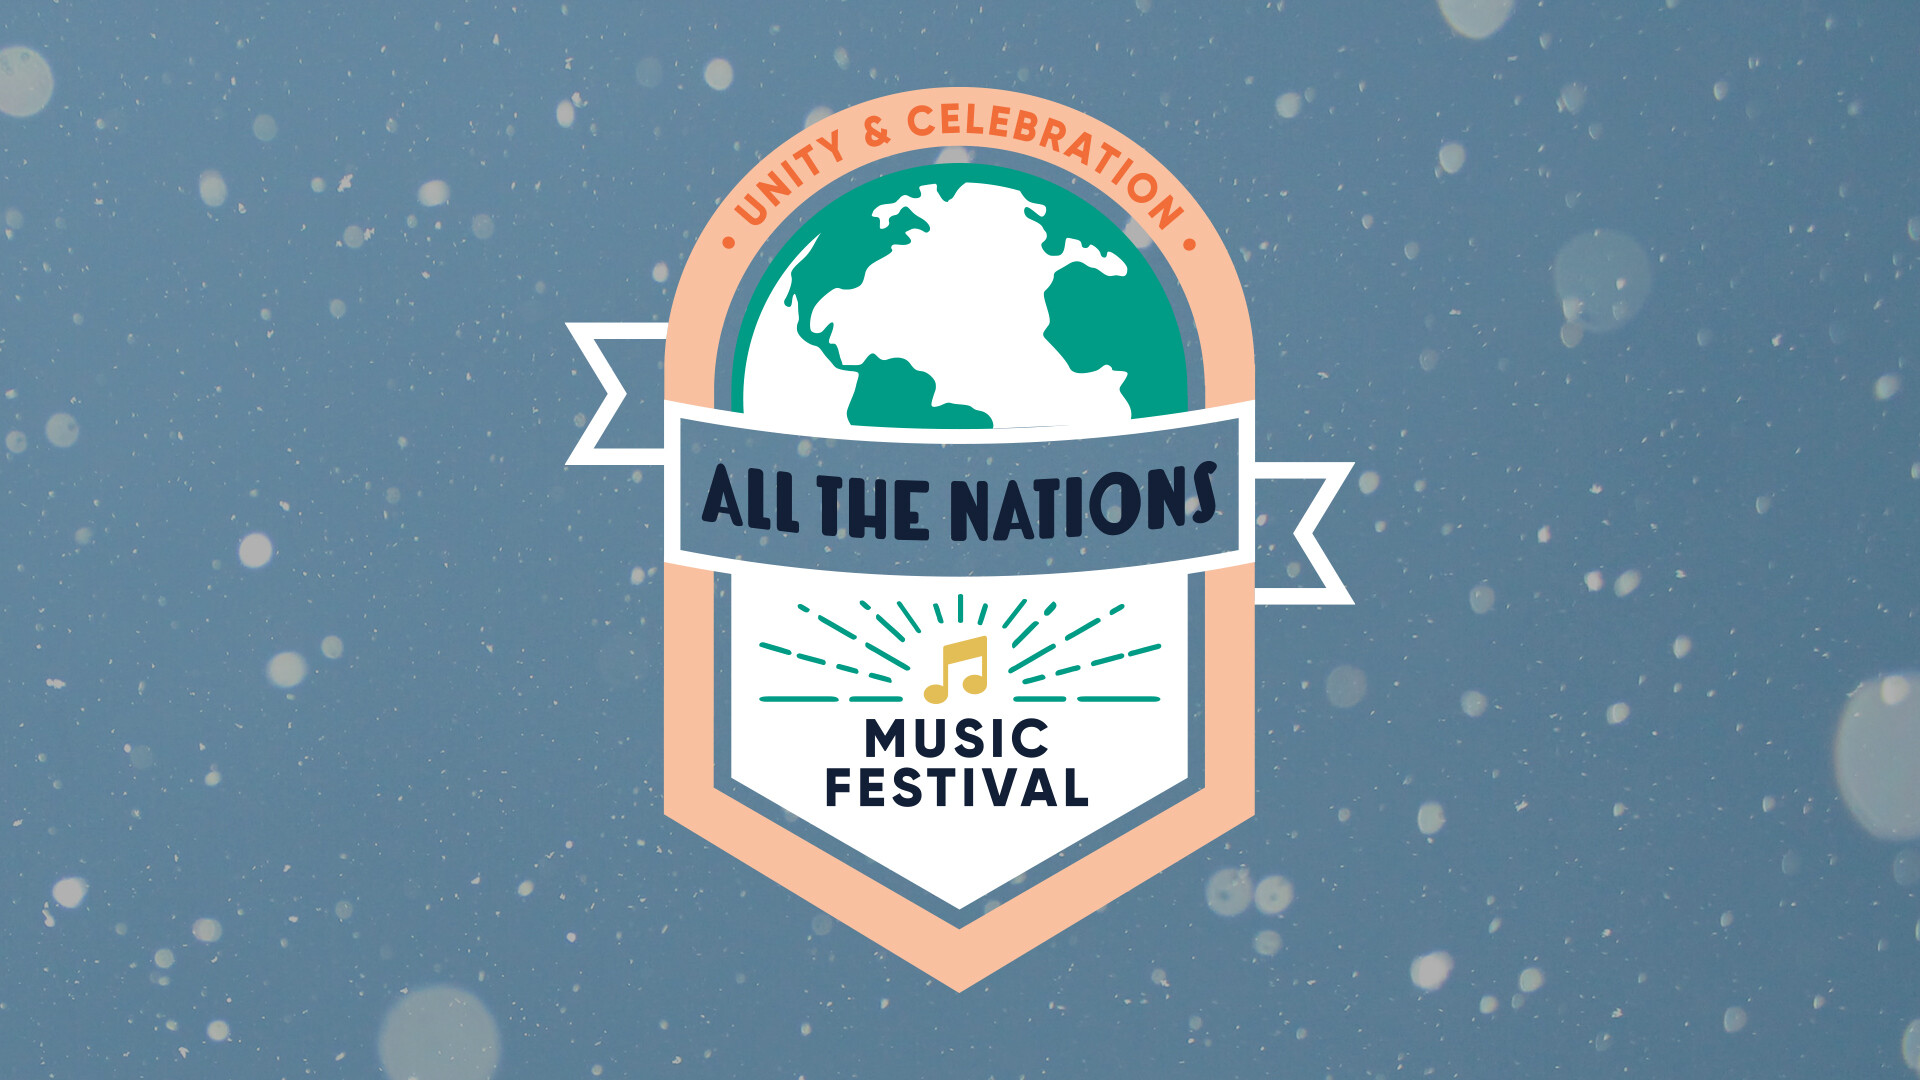 All the Nations Music Festival